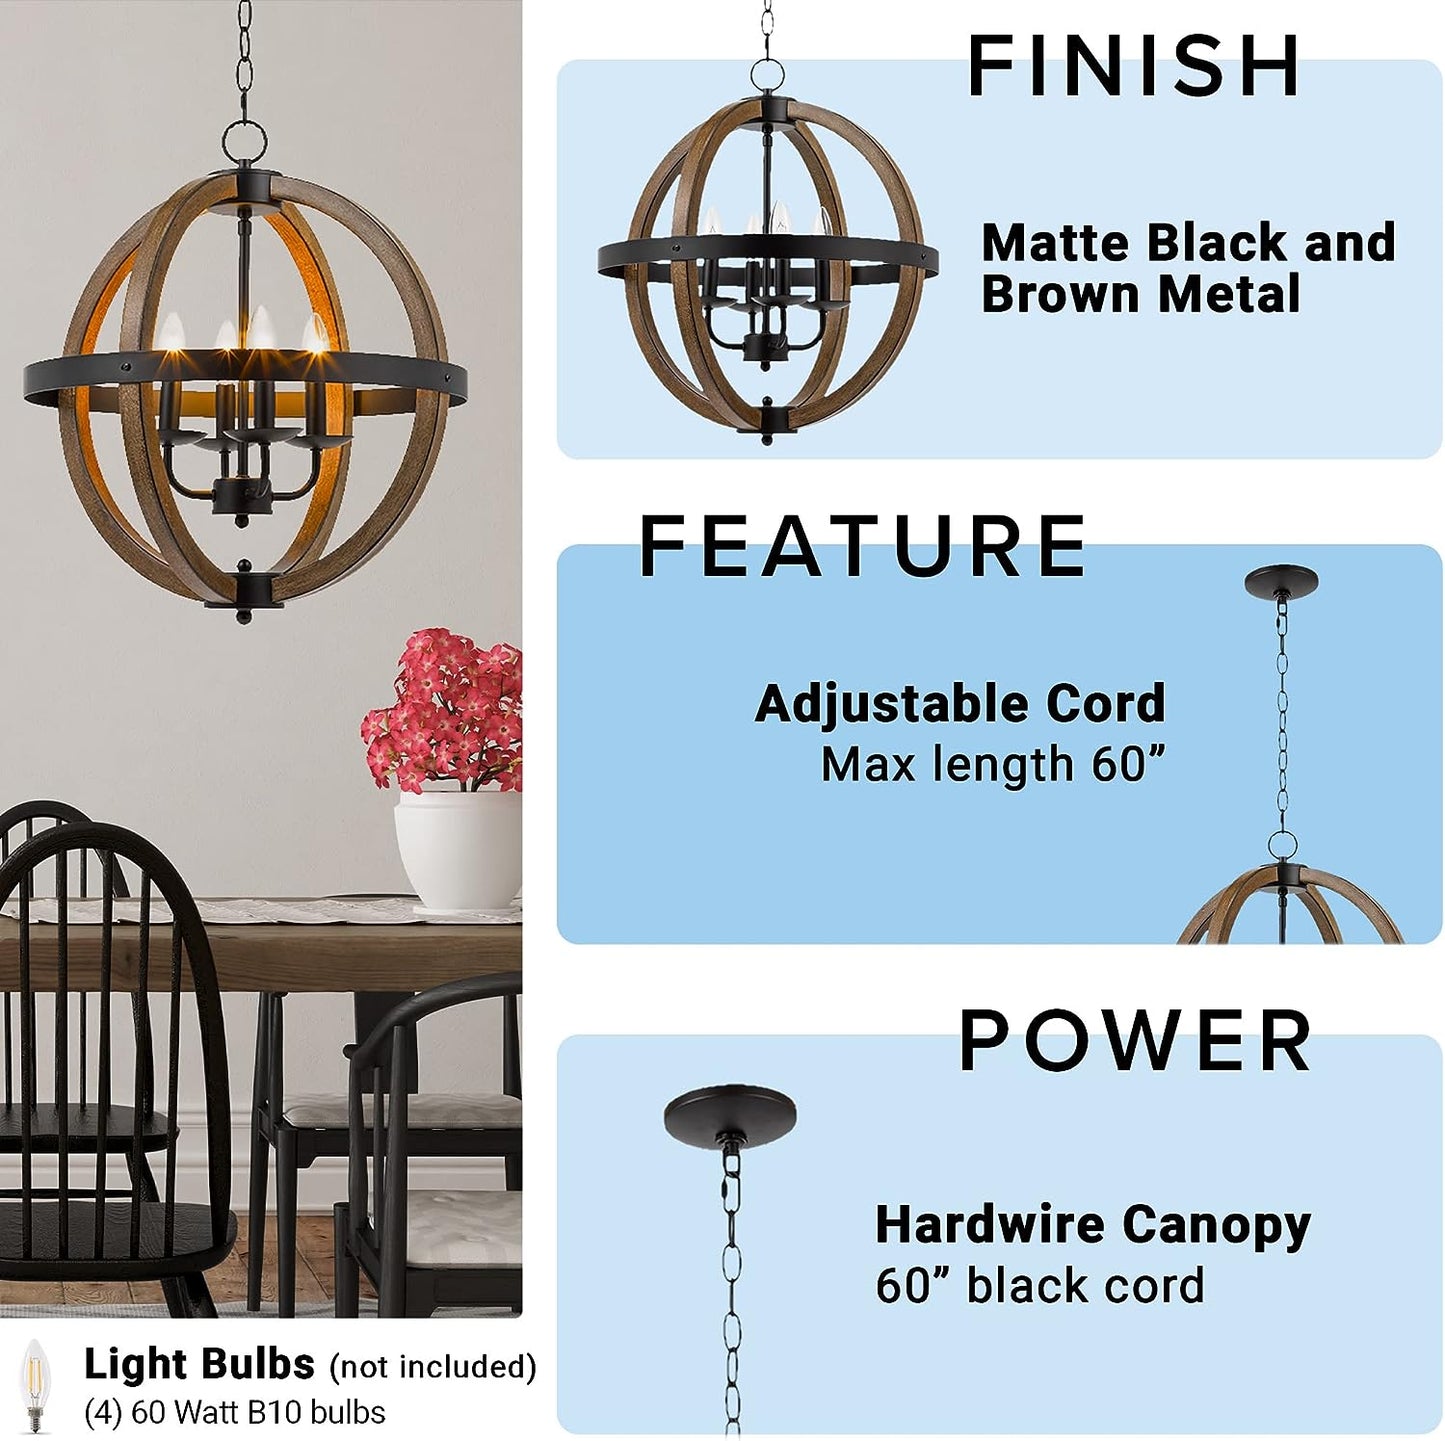 Catalina 18"W 4-Light Country Rustic Geometric Open-Cage Orb Pendant Chandelier, Faux Wood Finish with Black Accents